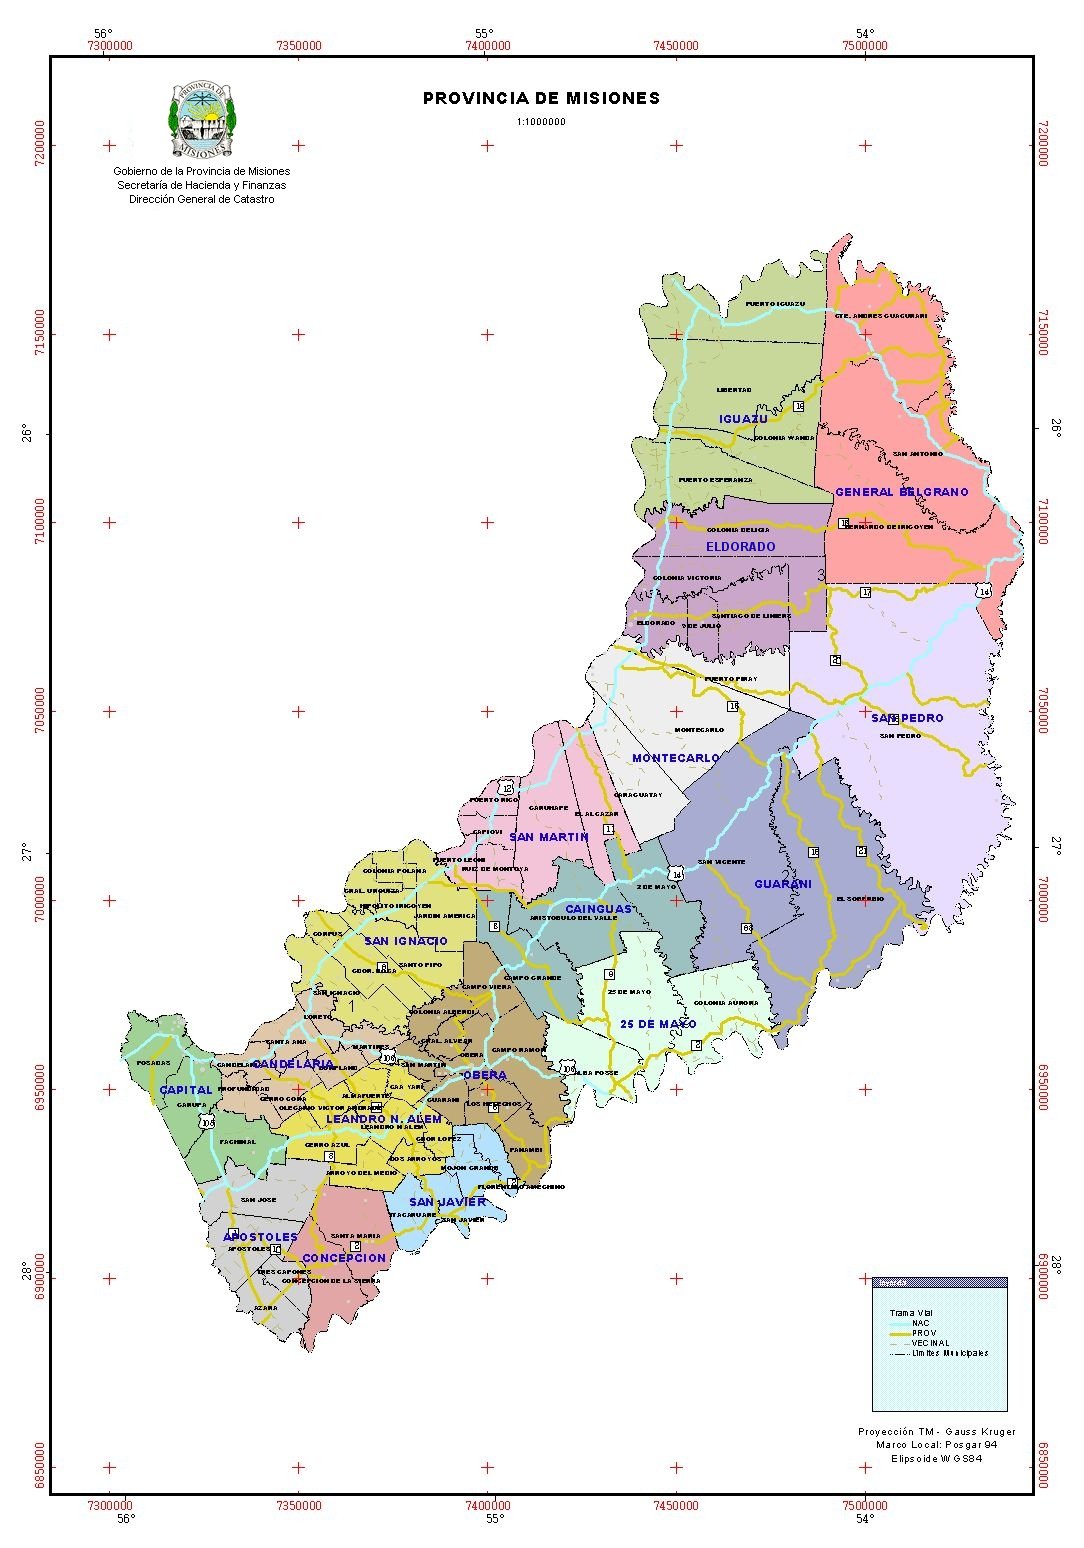 Political Map Of The Province Of Misiones Argentina Full Size Ex 9952